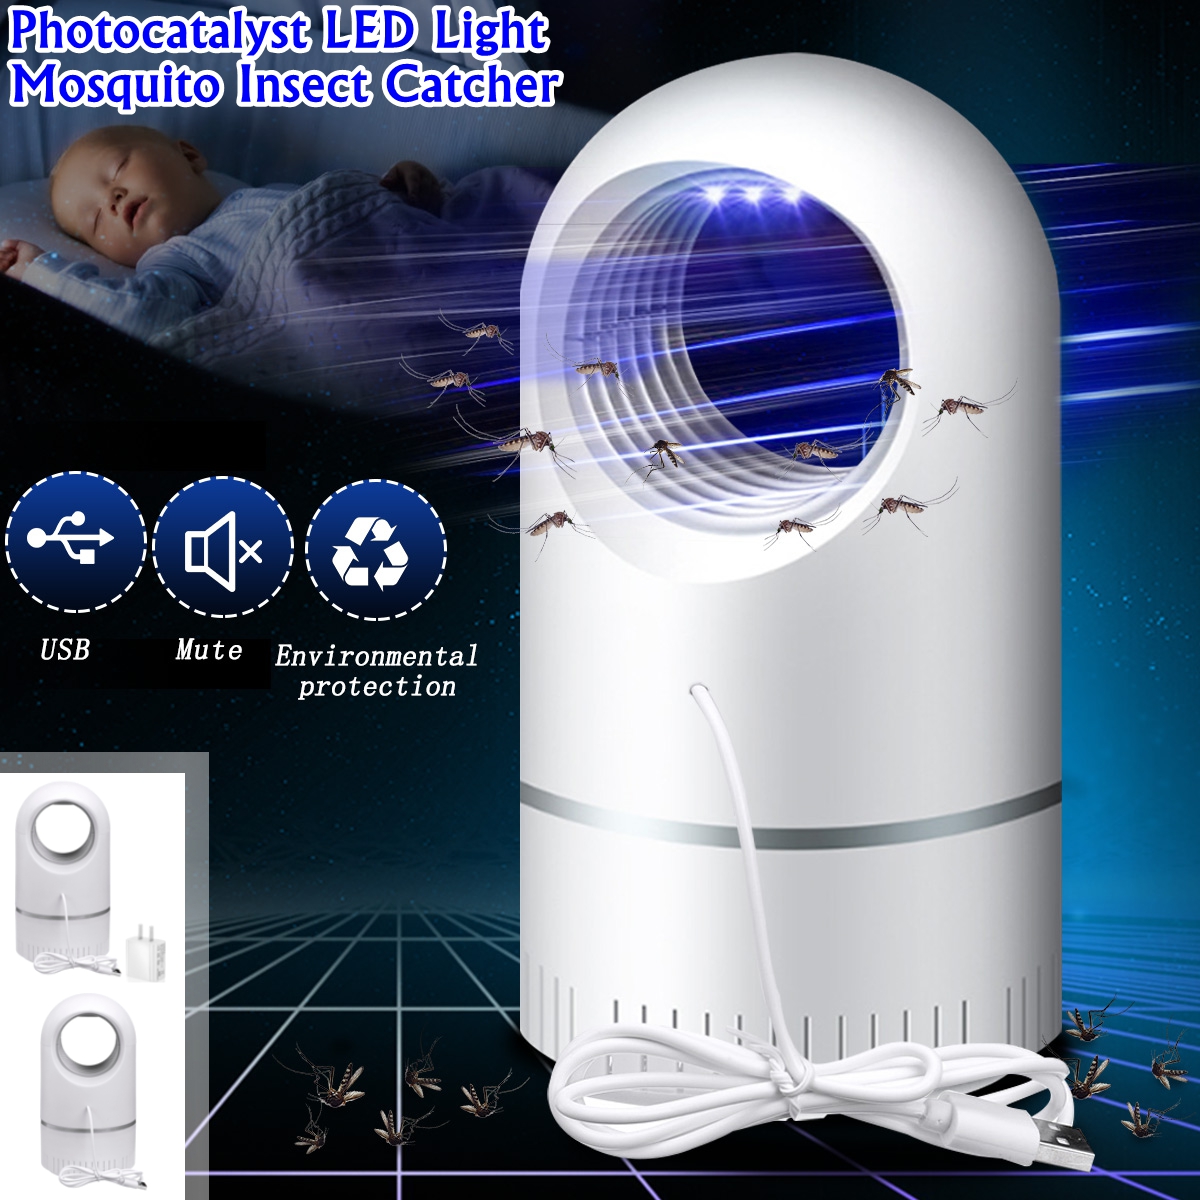 Photocatalyst-360deg-LED-Mosquito-Trapping-Catcher-Lamp-Insect-Trap-Light-USB-Mosquito-Lamp-Fy-Repel-1516538-1